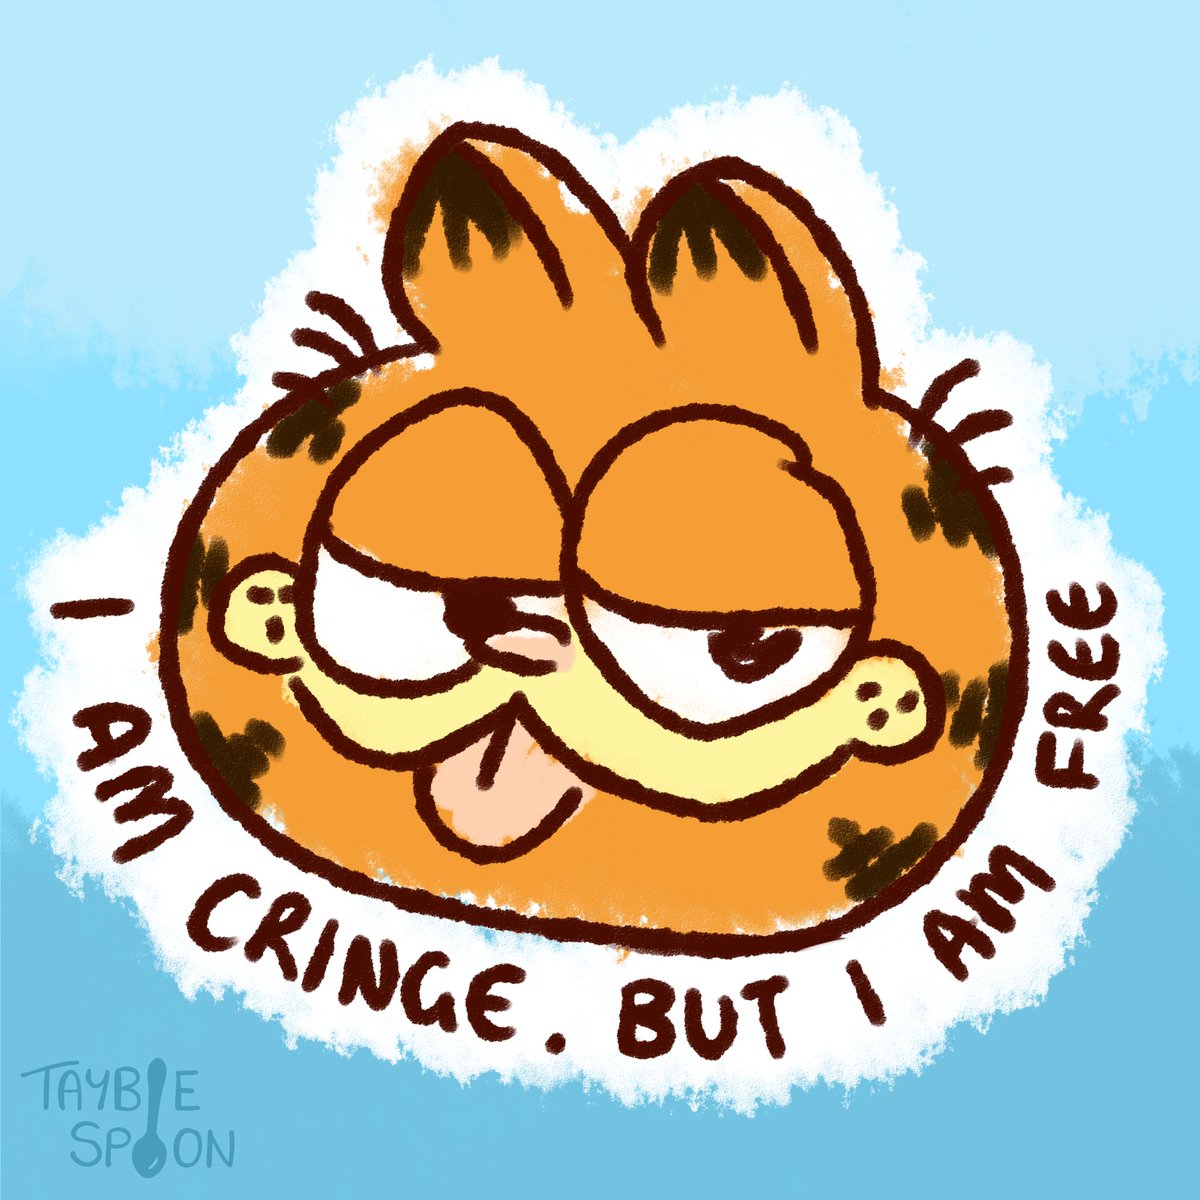 Garfield post of the dayyy 
An upcoming sticker for Anime in the Valley! 

#garfield #garfieldlore #digitalart #art #garfieldmemes #meow #ginger #kitty #lasagna #garfieldart #garf #garfieldmemes #doodle #digitalart #art #artist #memes #artmemes #doodleart